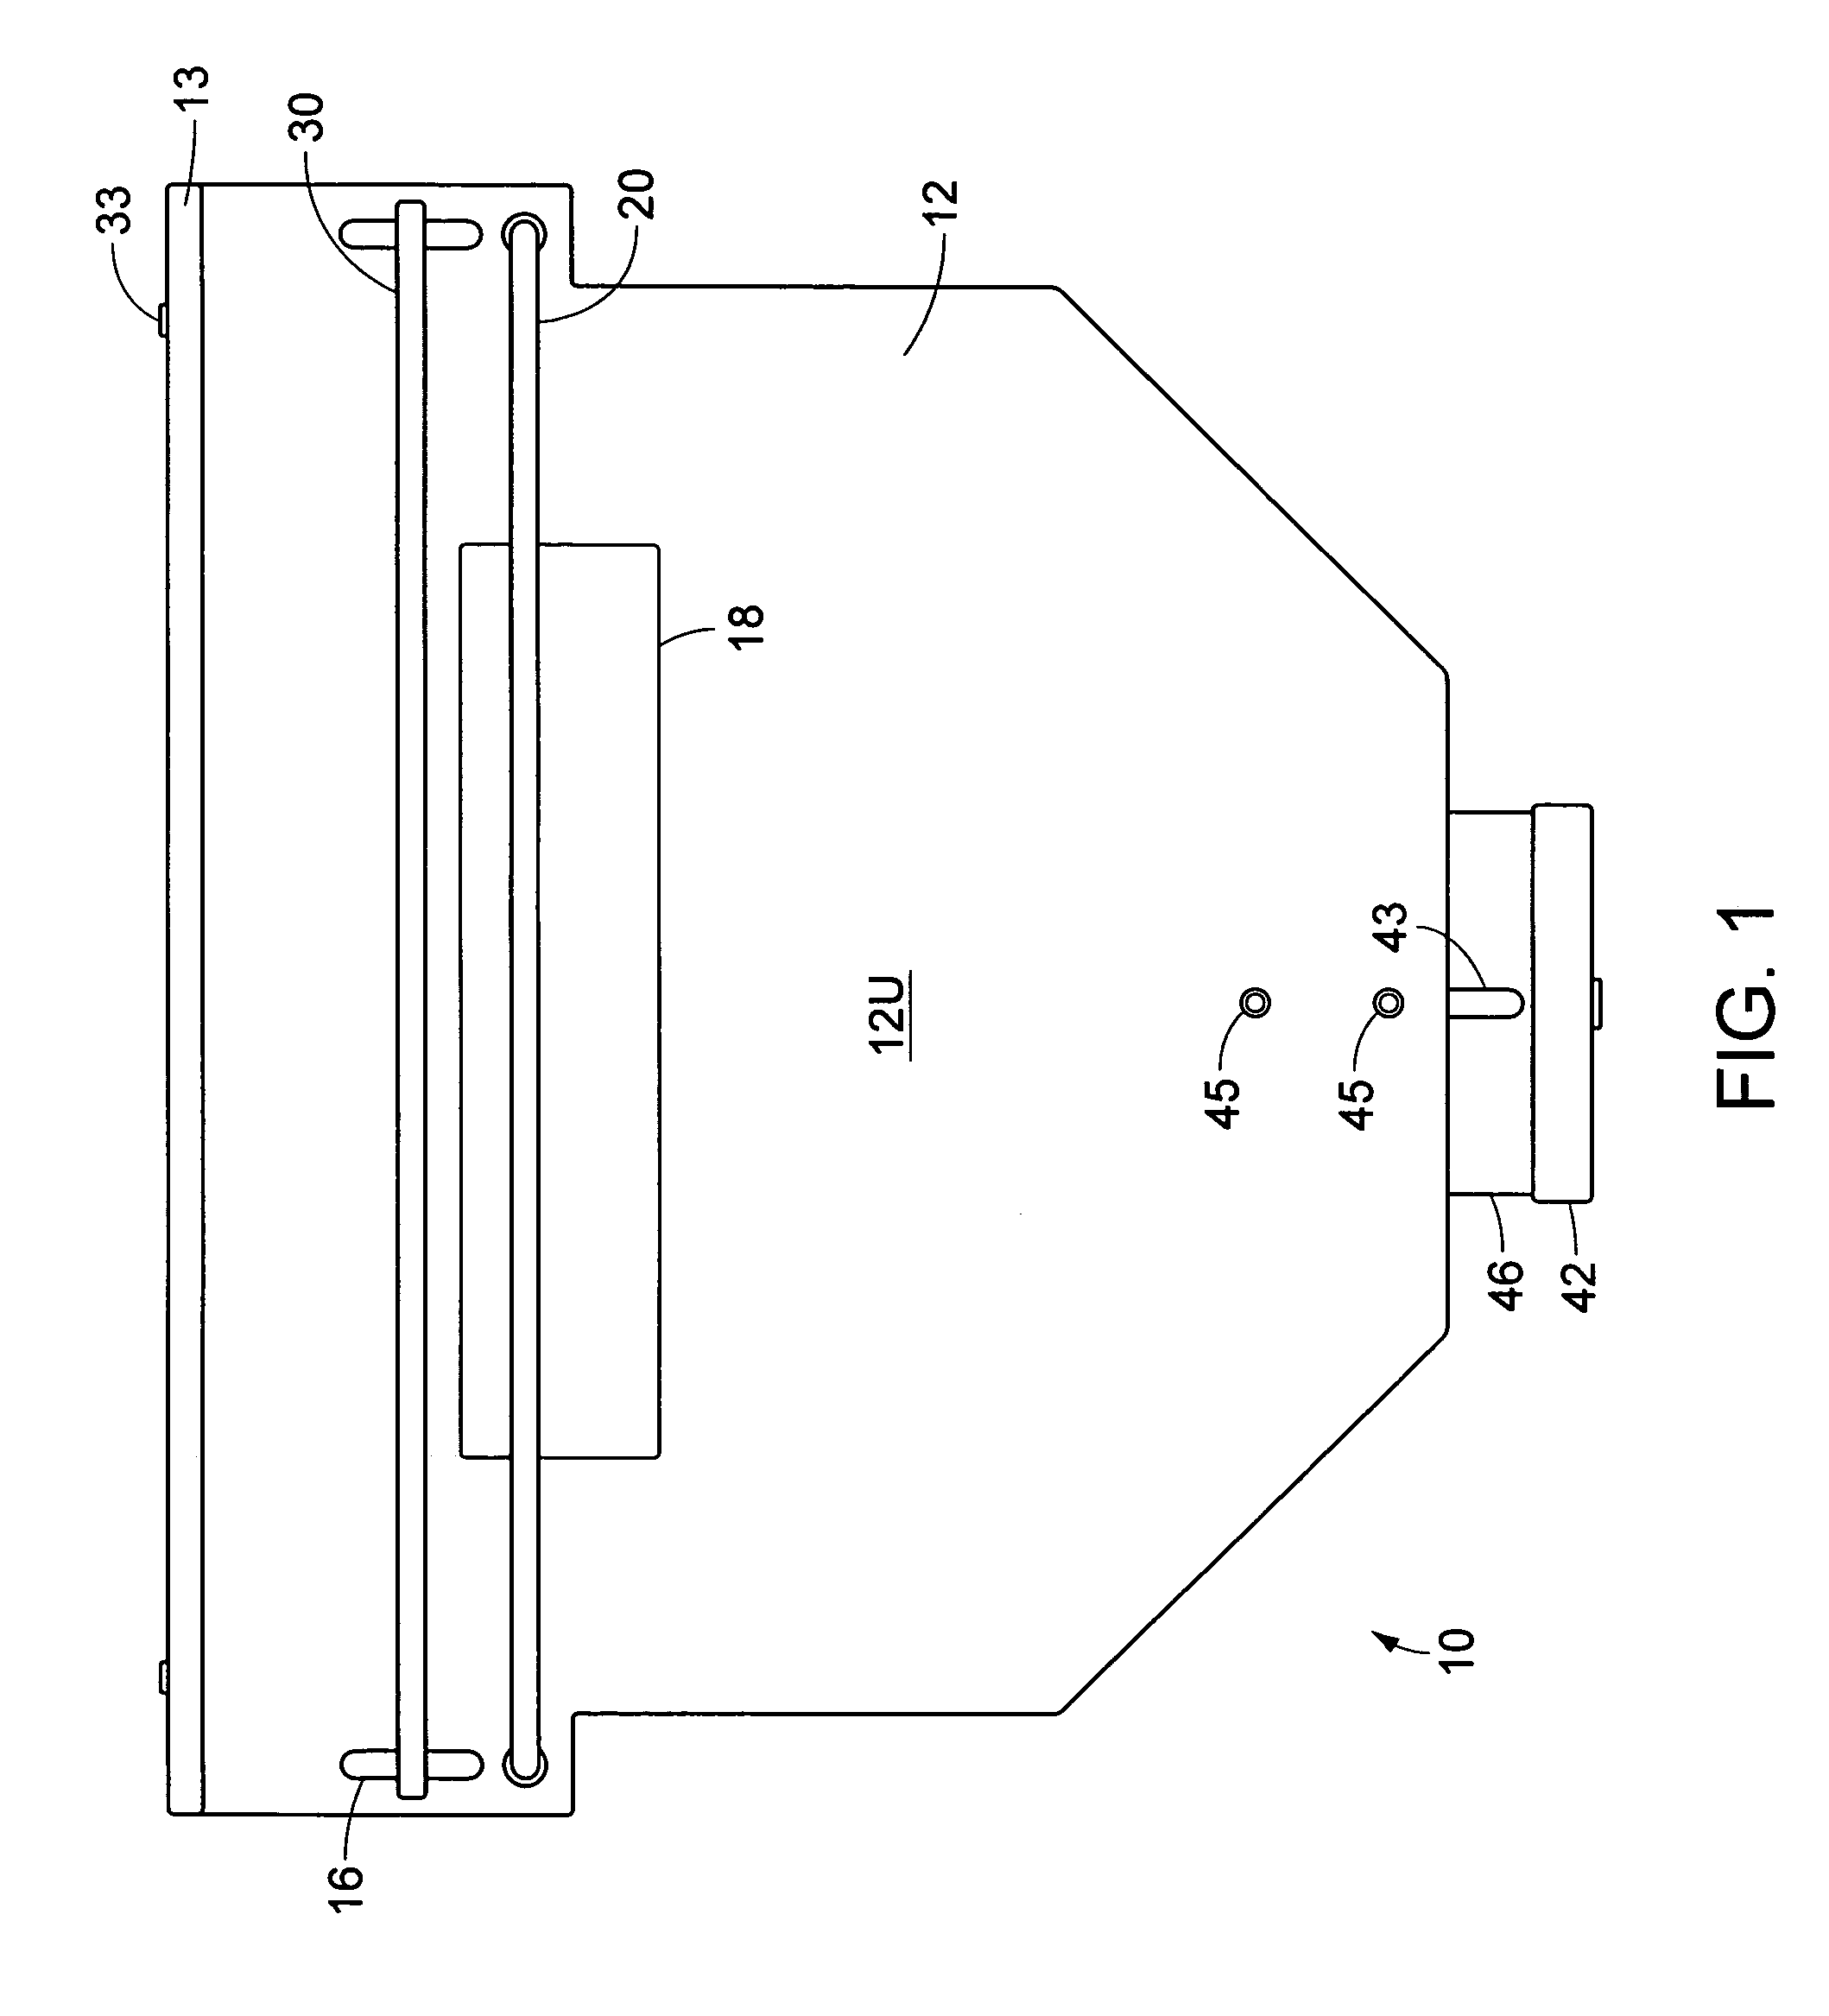 Merchandise display and anti-theft system